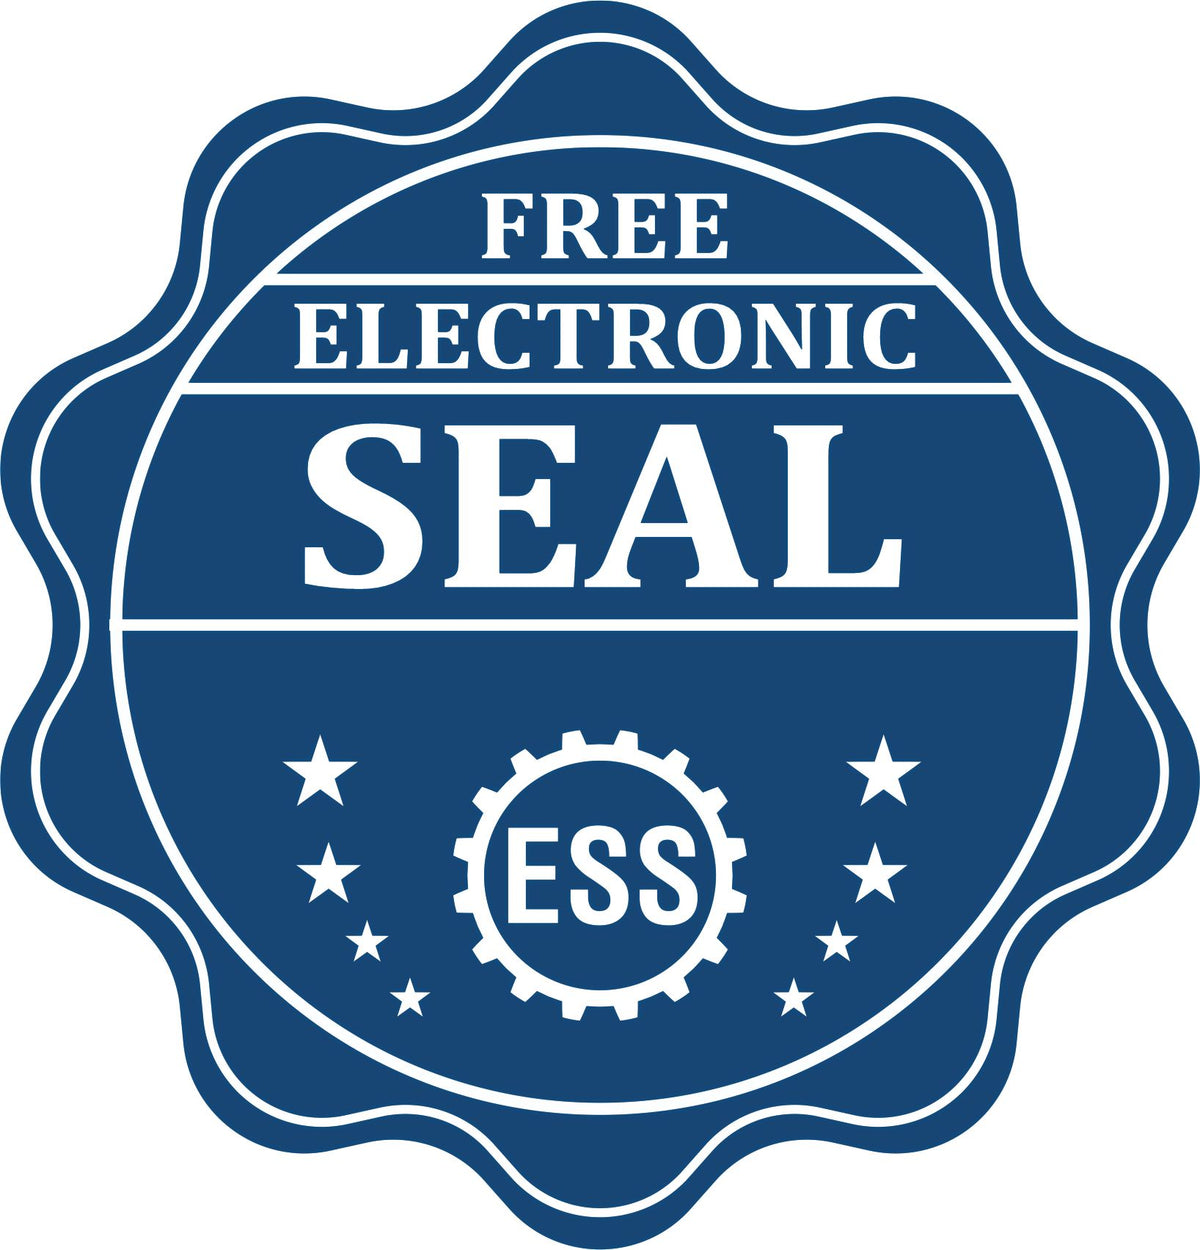 A badge showing a free electronic seal for the Vermont Engineer Desk Seal with stars and the ESS gear on the emblem.